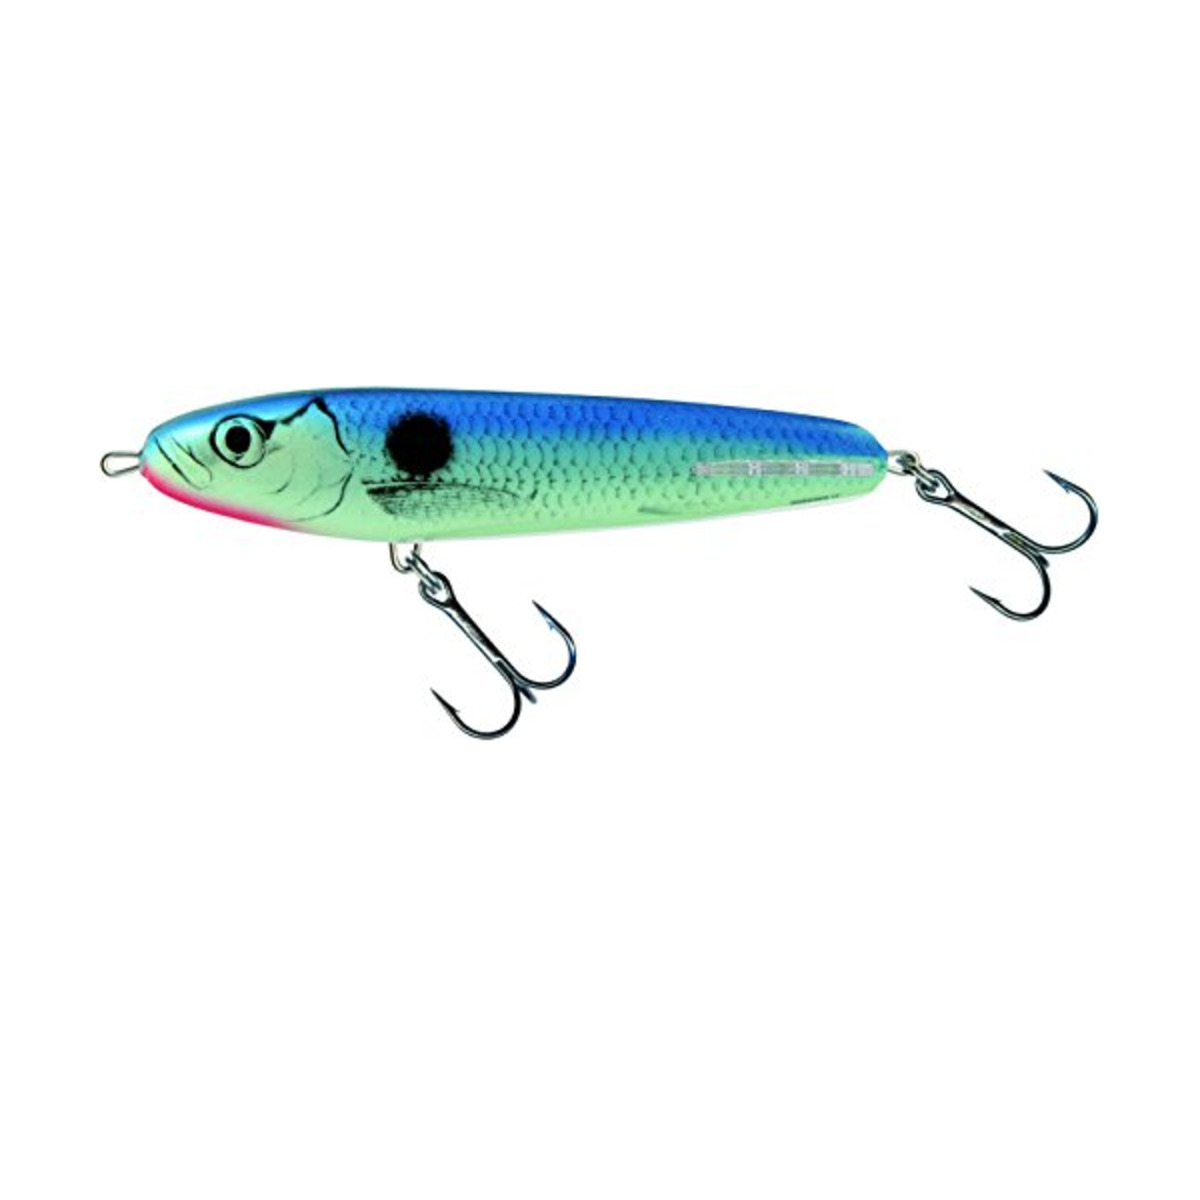 Salmo Sweeper Sinking - 17 Cm - Turquoise Shad